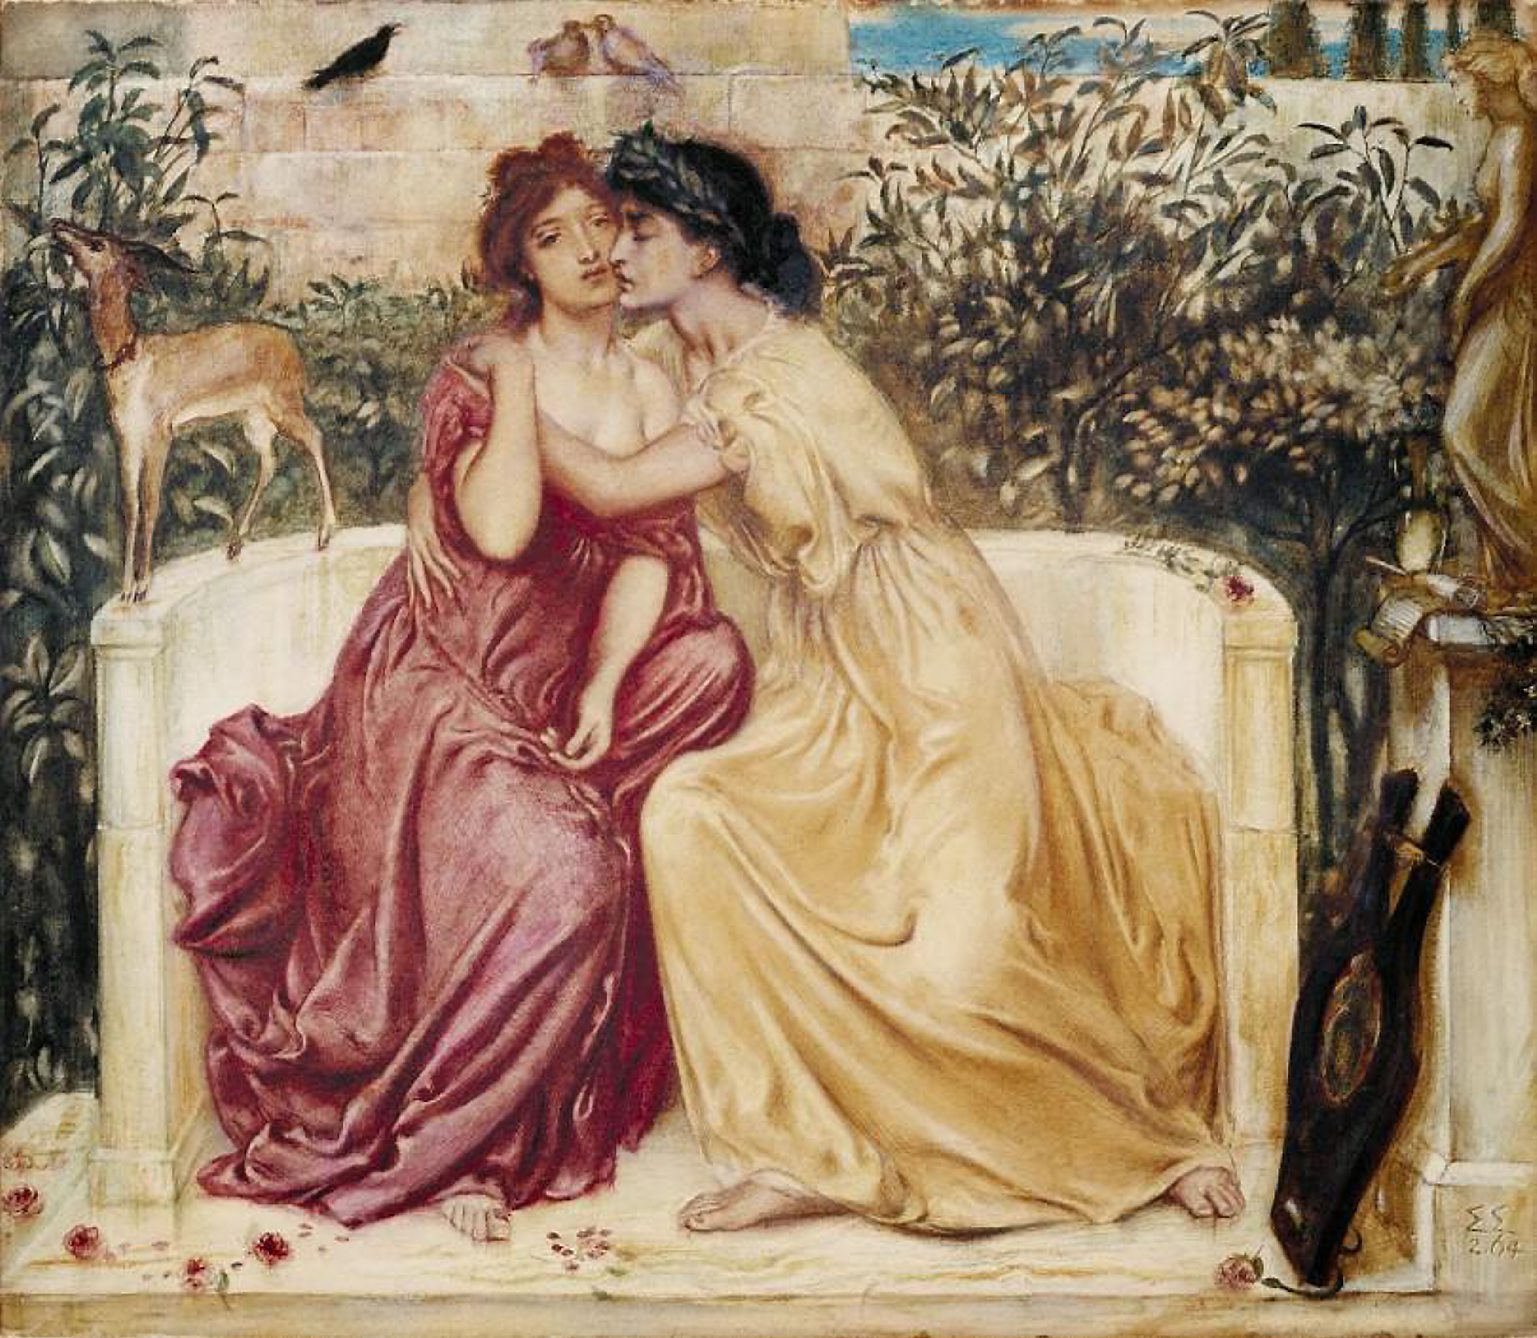 Poetry and lesbianism in ancient Greece